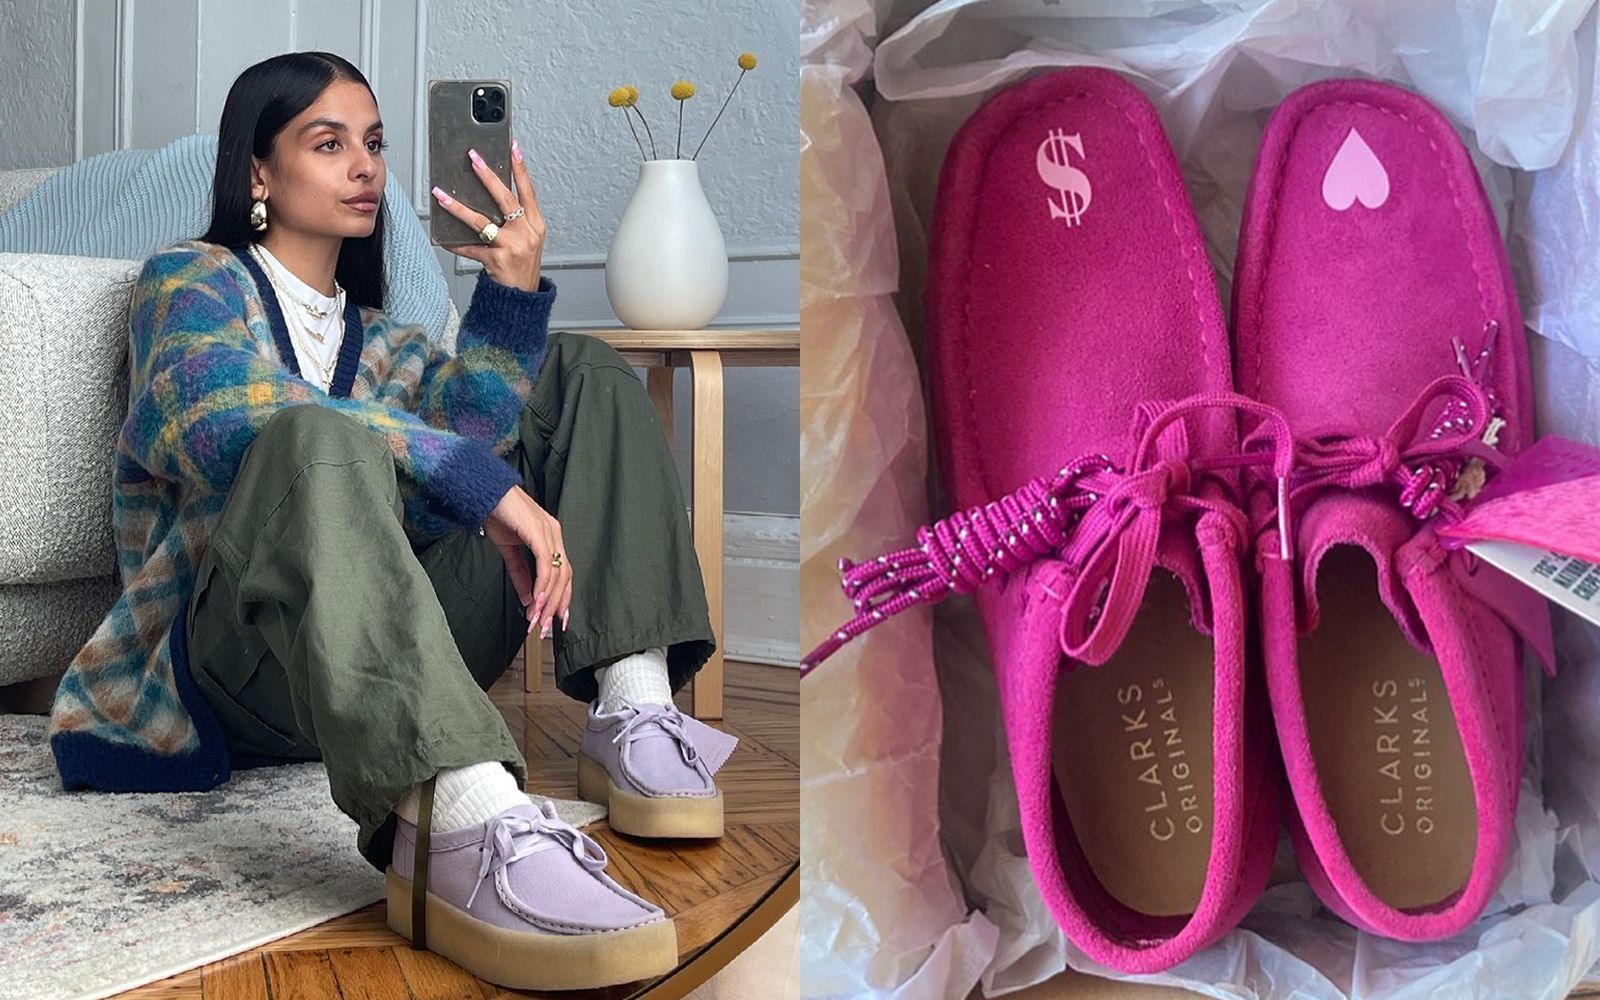 Wallabees are the new the female wardrobe